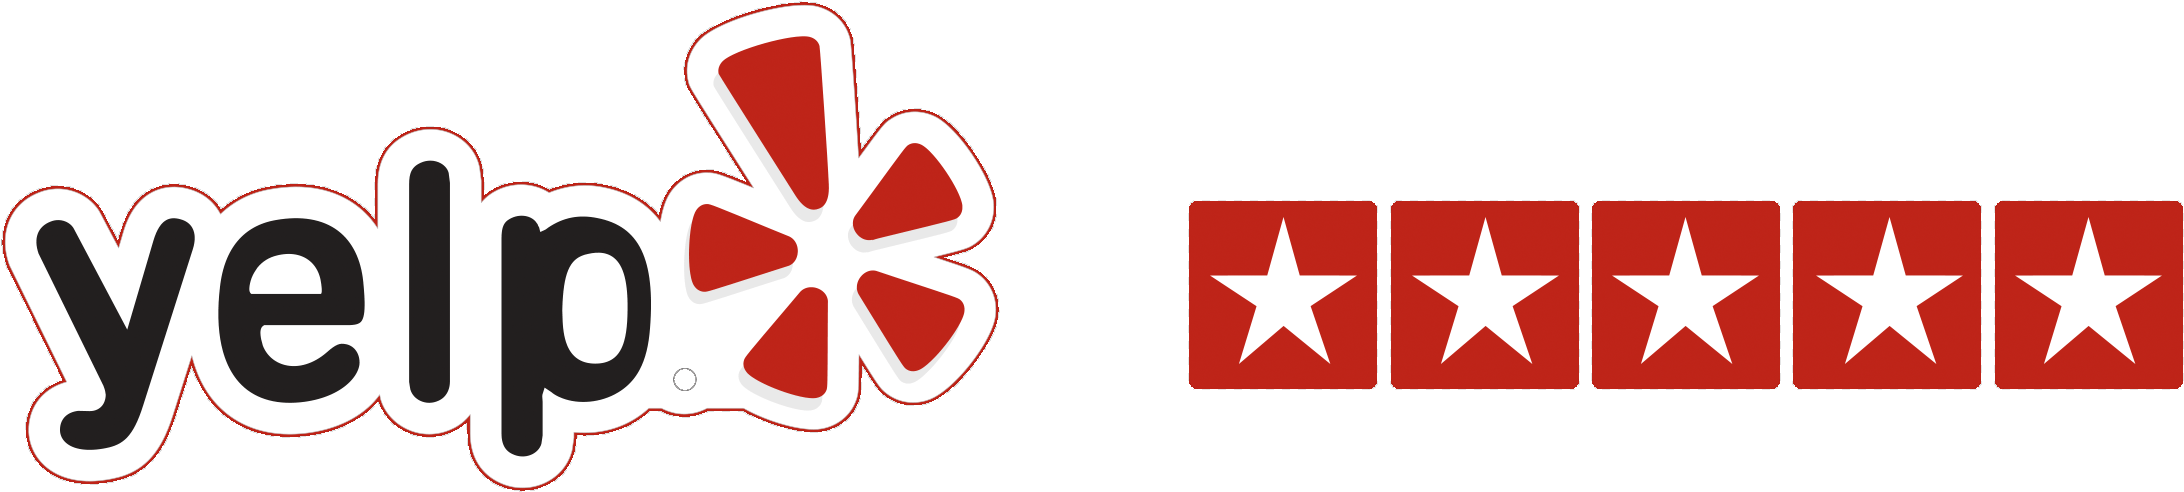 flat yelp icon png